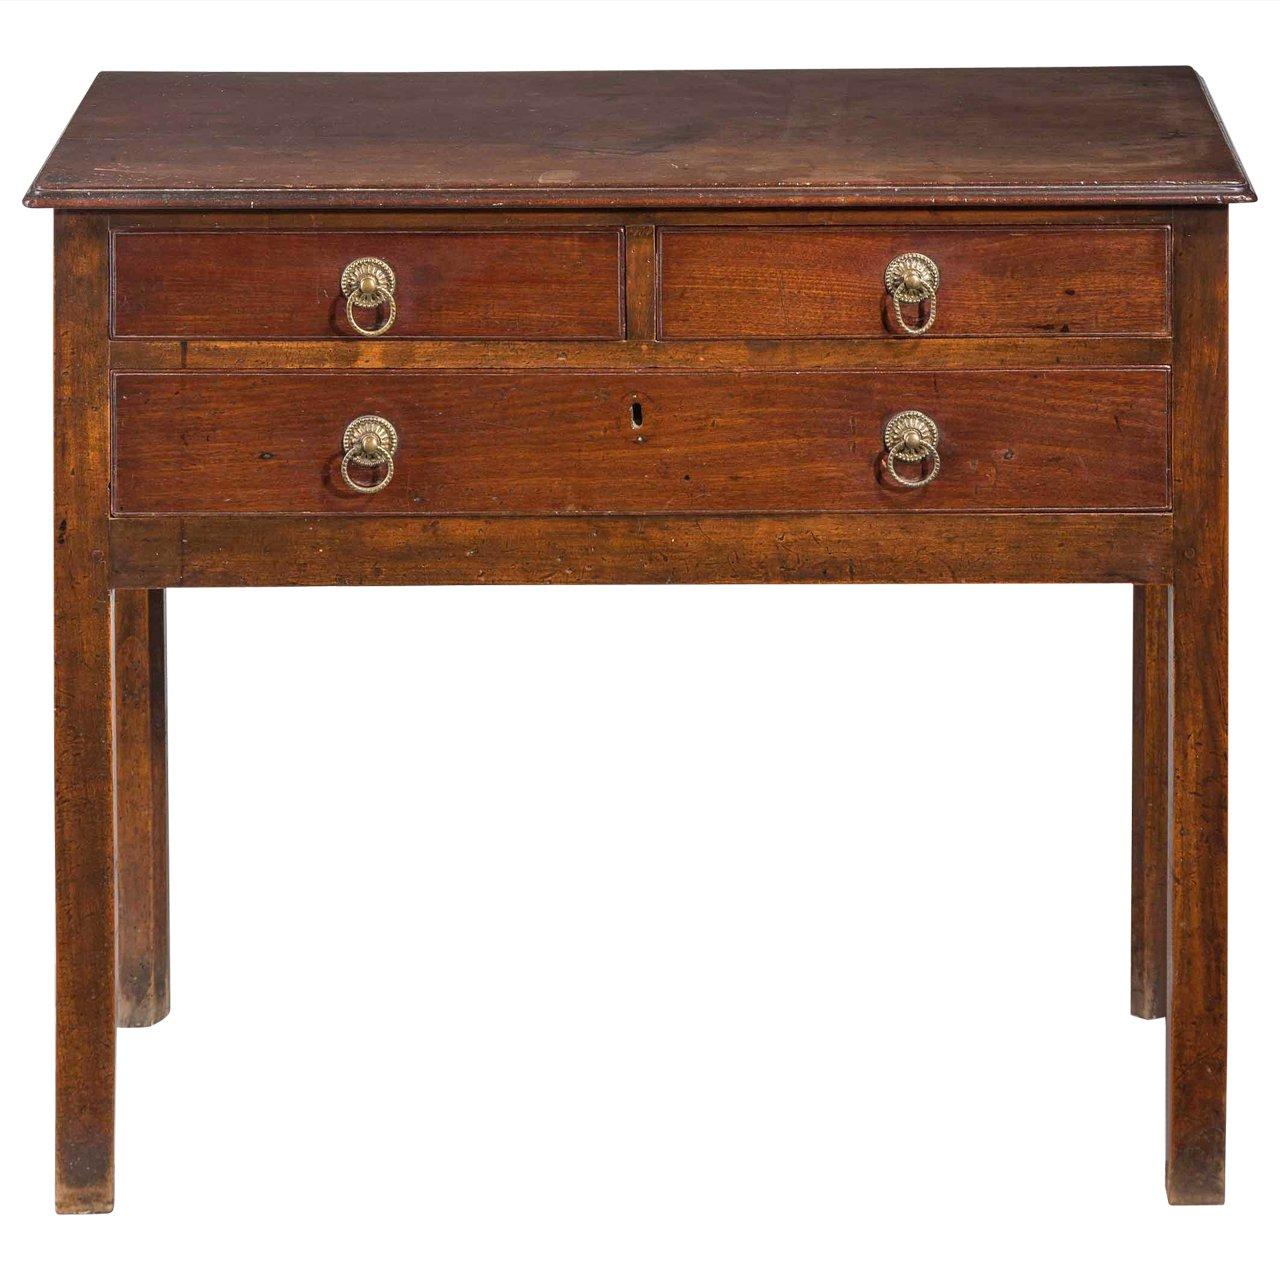 Chippendale Period Mahogany Chest